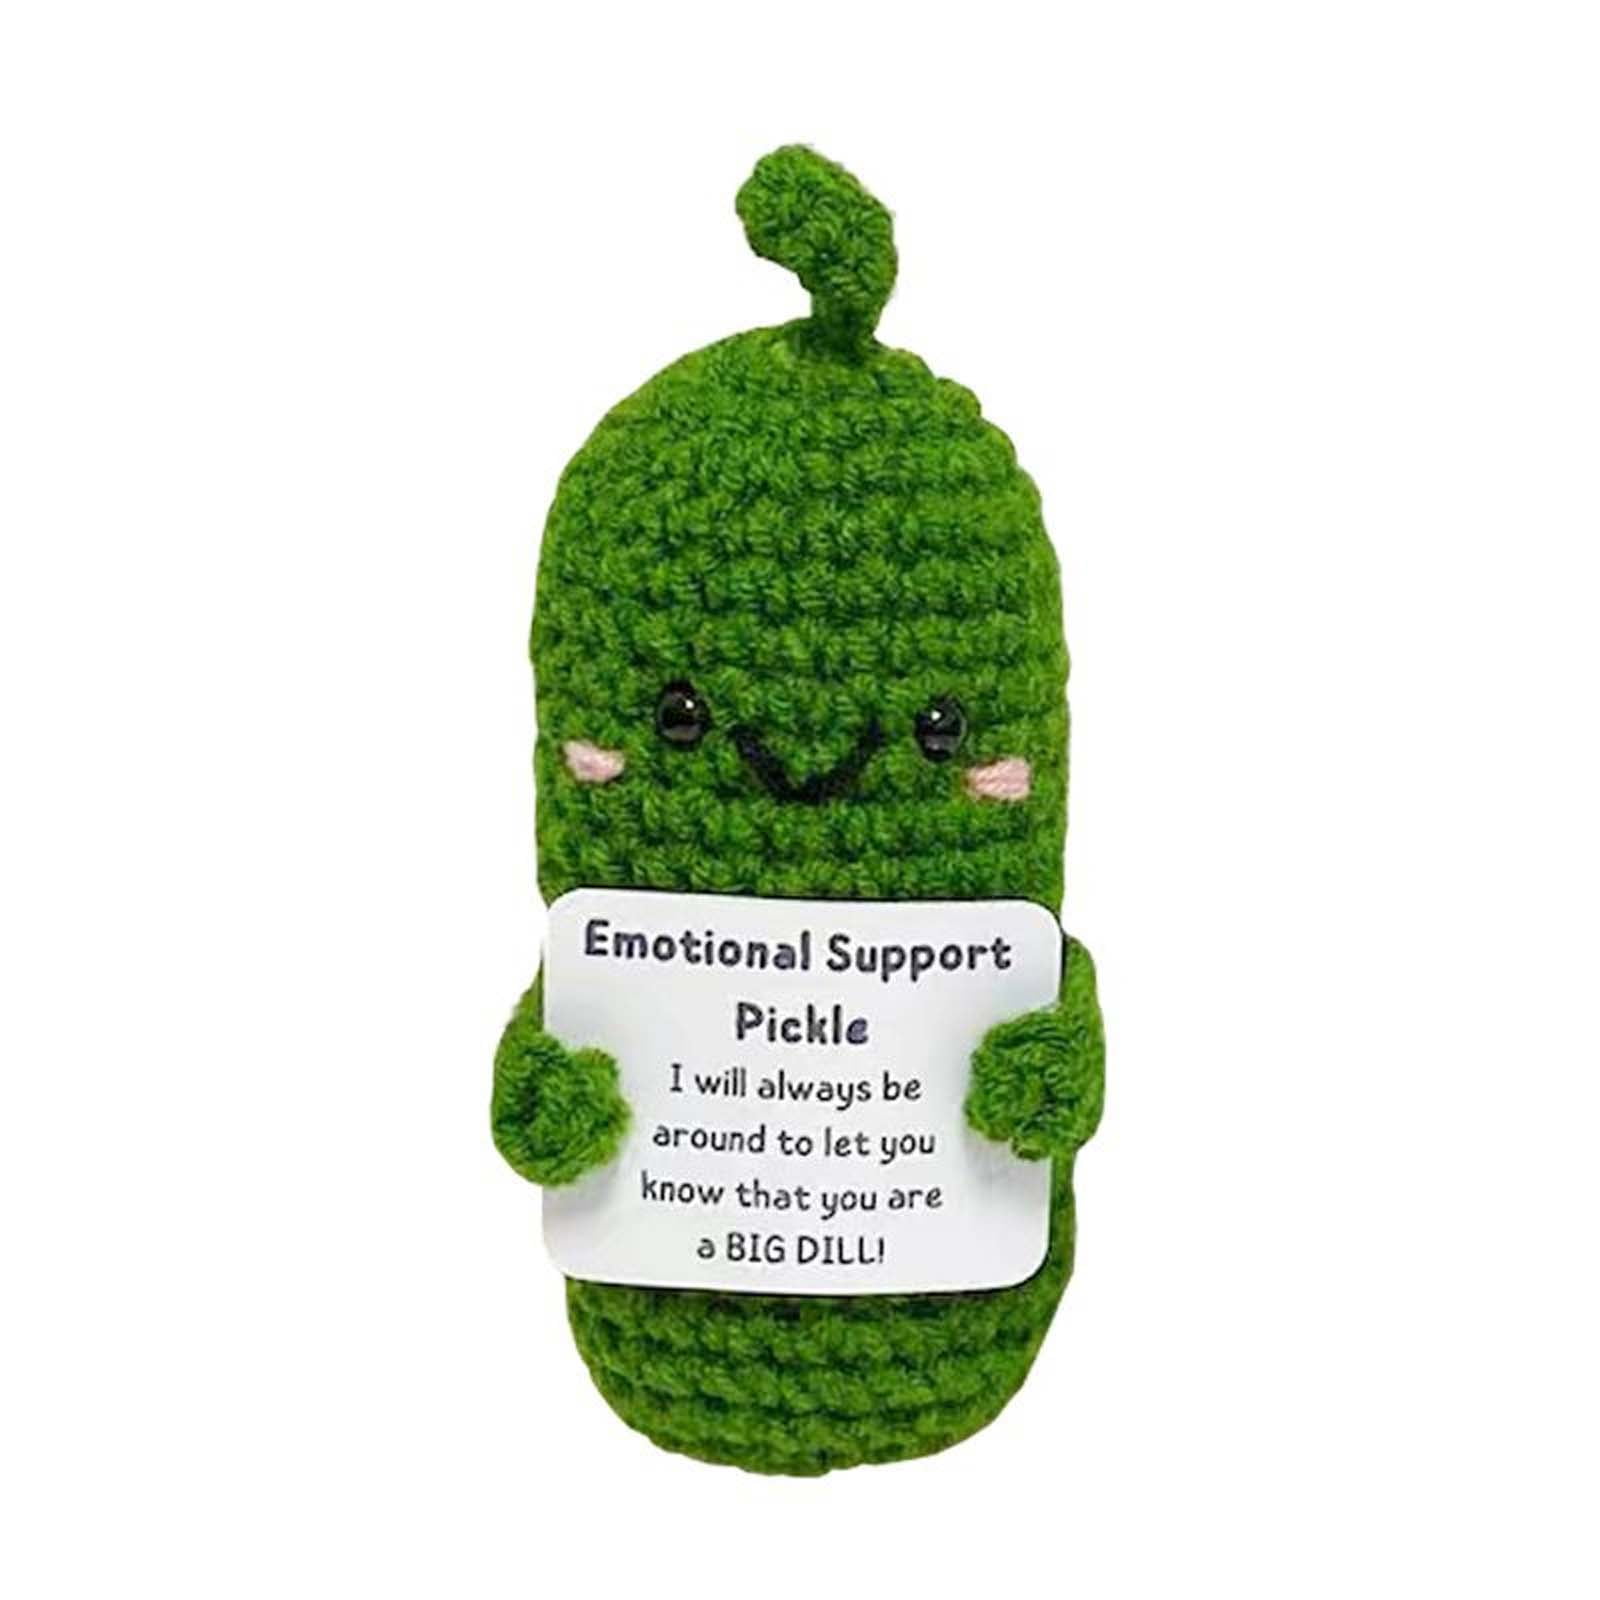 Crochet Emotional Support Pickle,caring Carrot With Positive